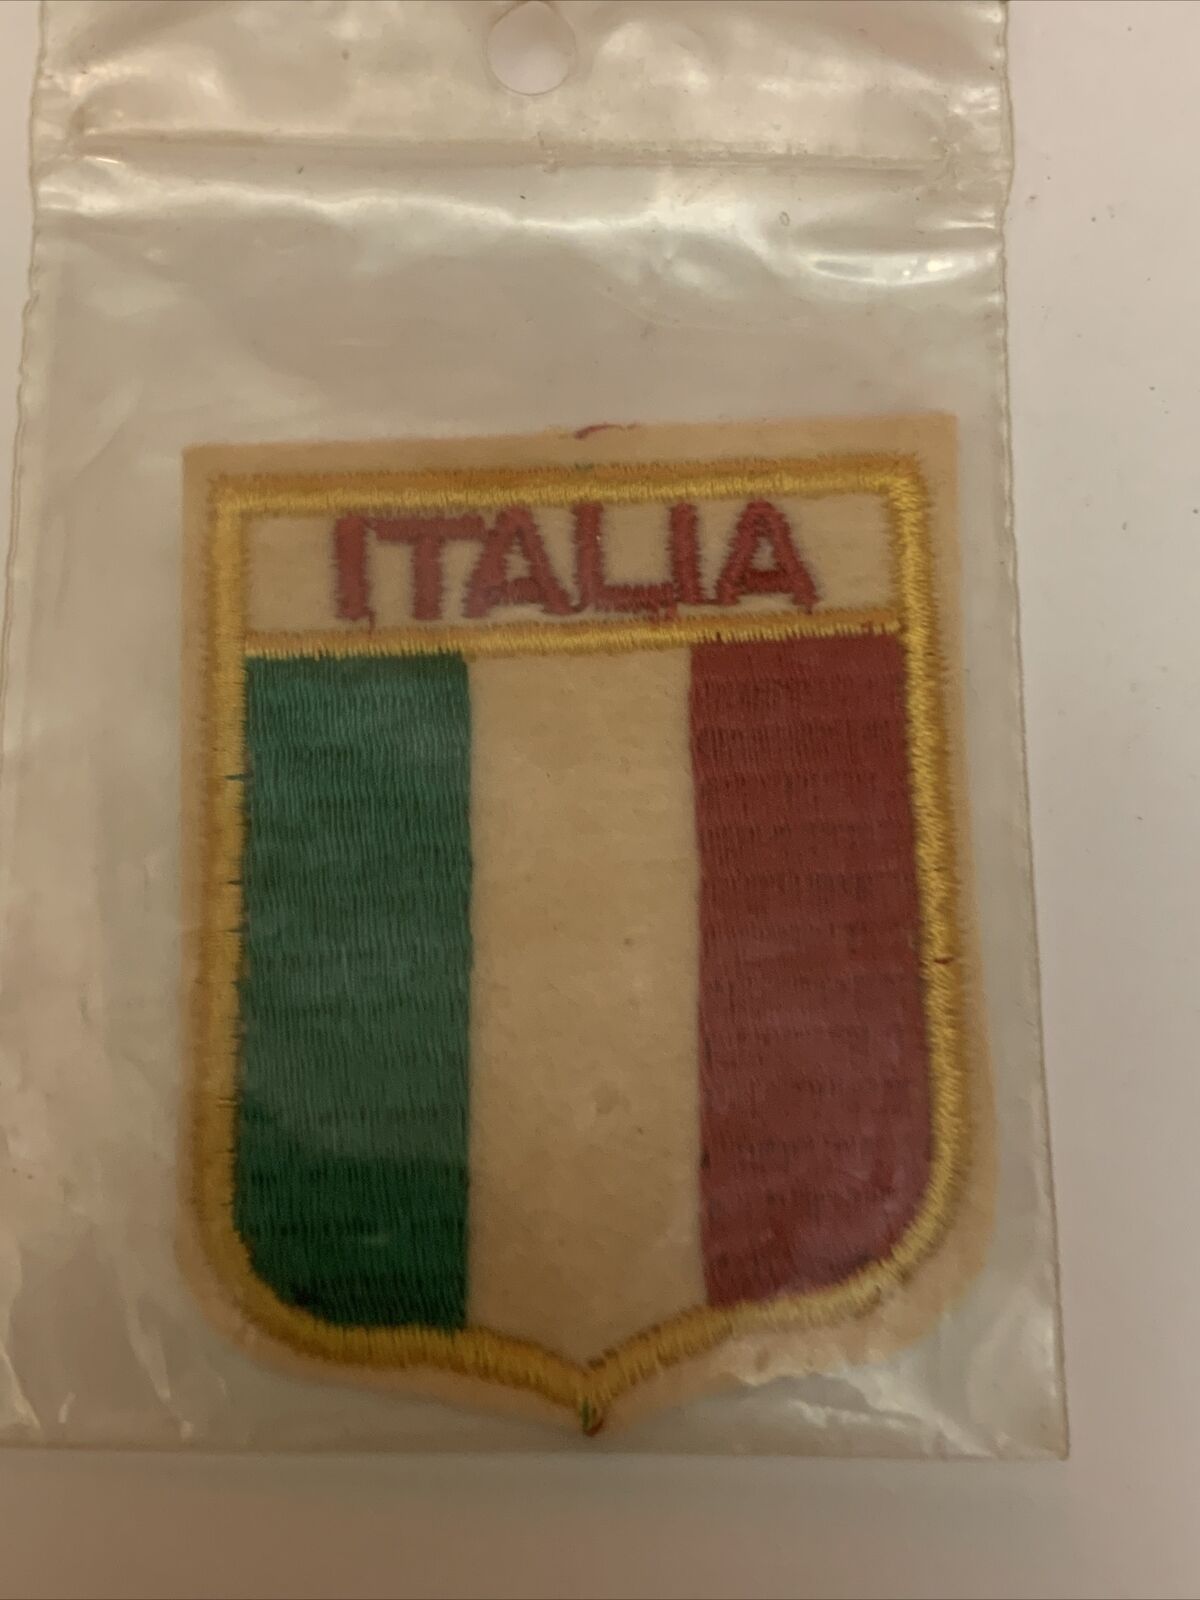 CLASSIC ORIGINAL 1970 NEW VINTAGE ITALIA PATCH. VERY OLD AND VINTAGE PATCH.